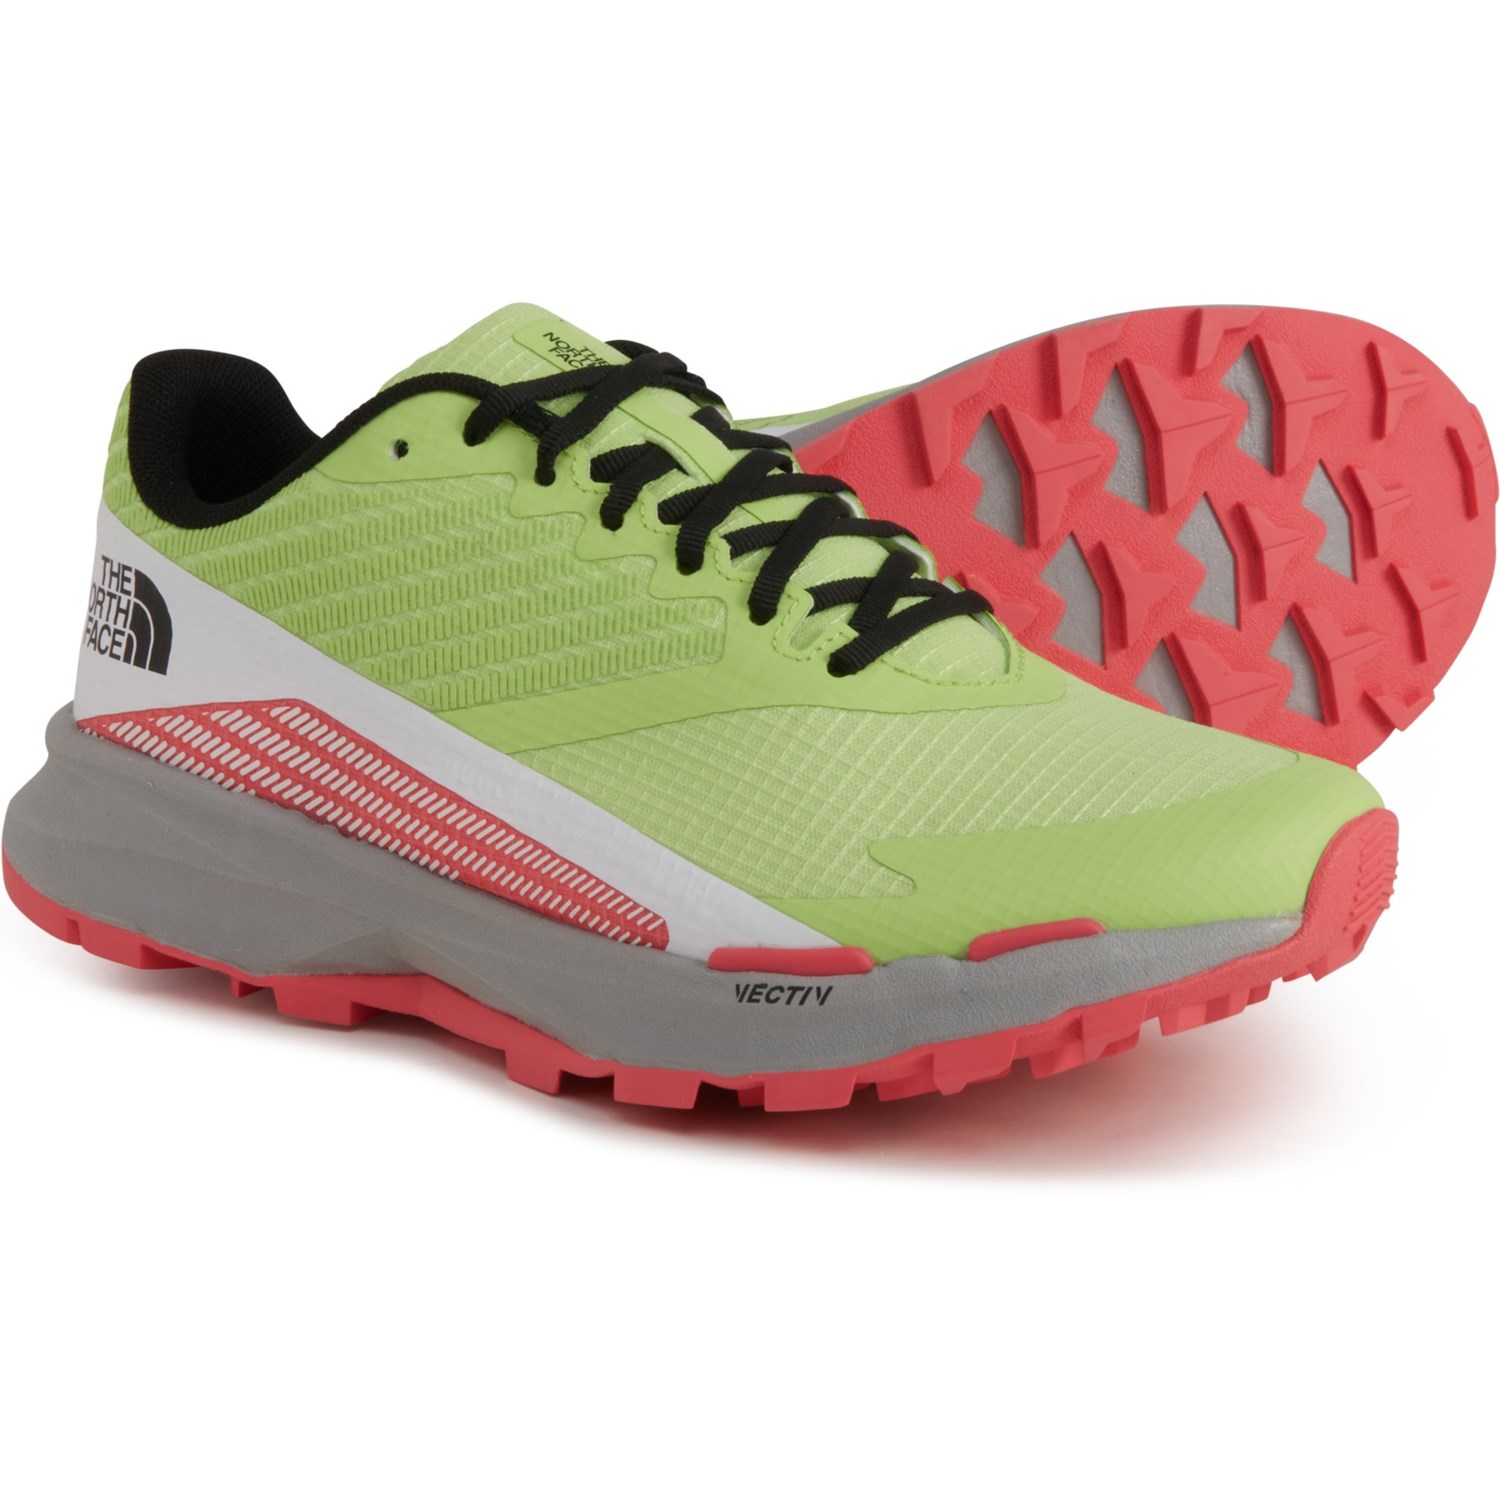 The North Face VECTIV Levitum Trail Running Shoes (For Women)